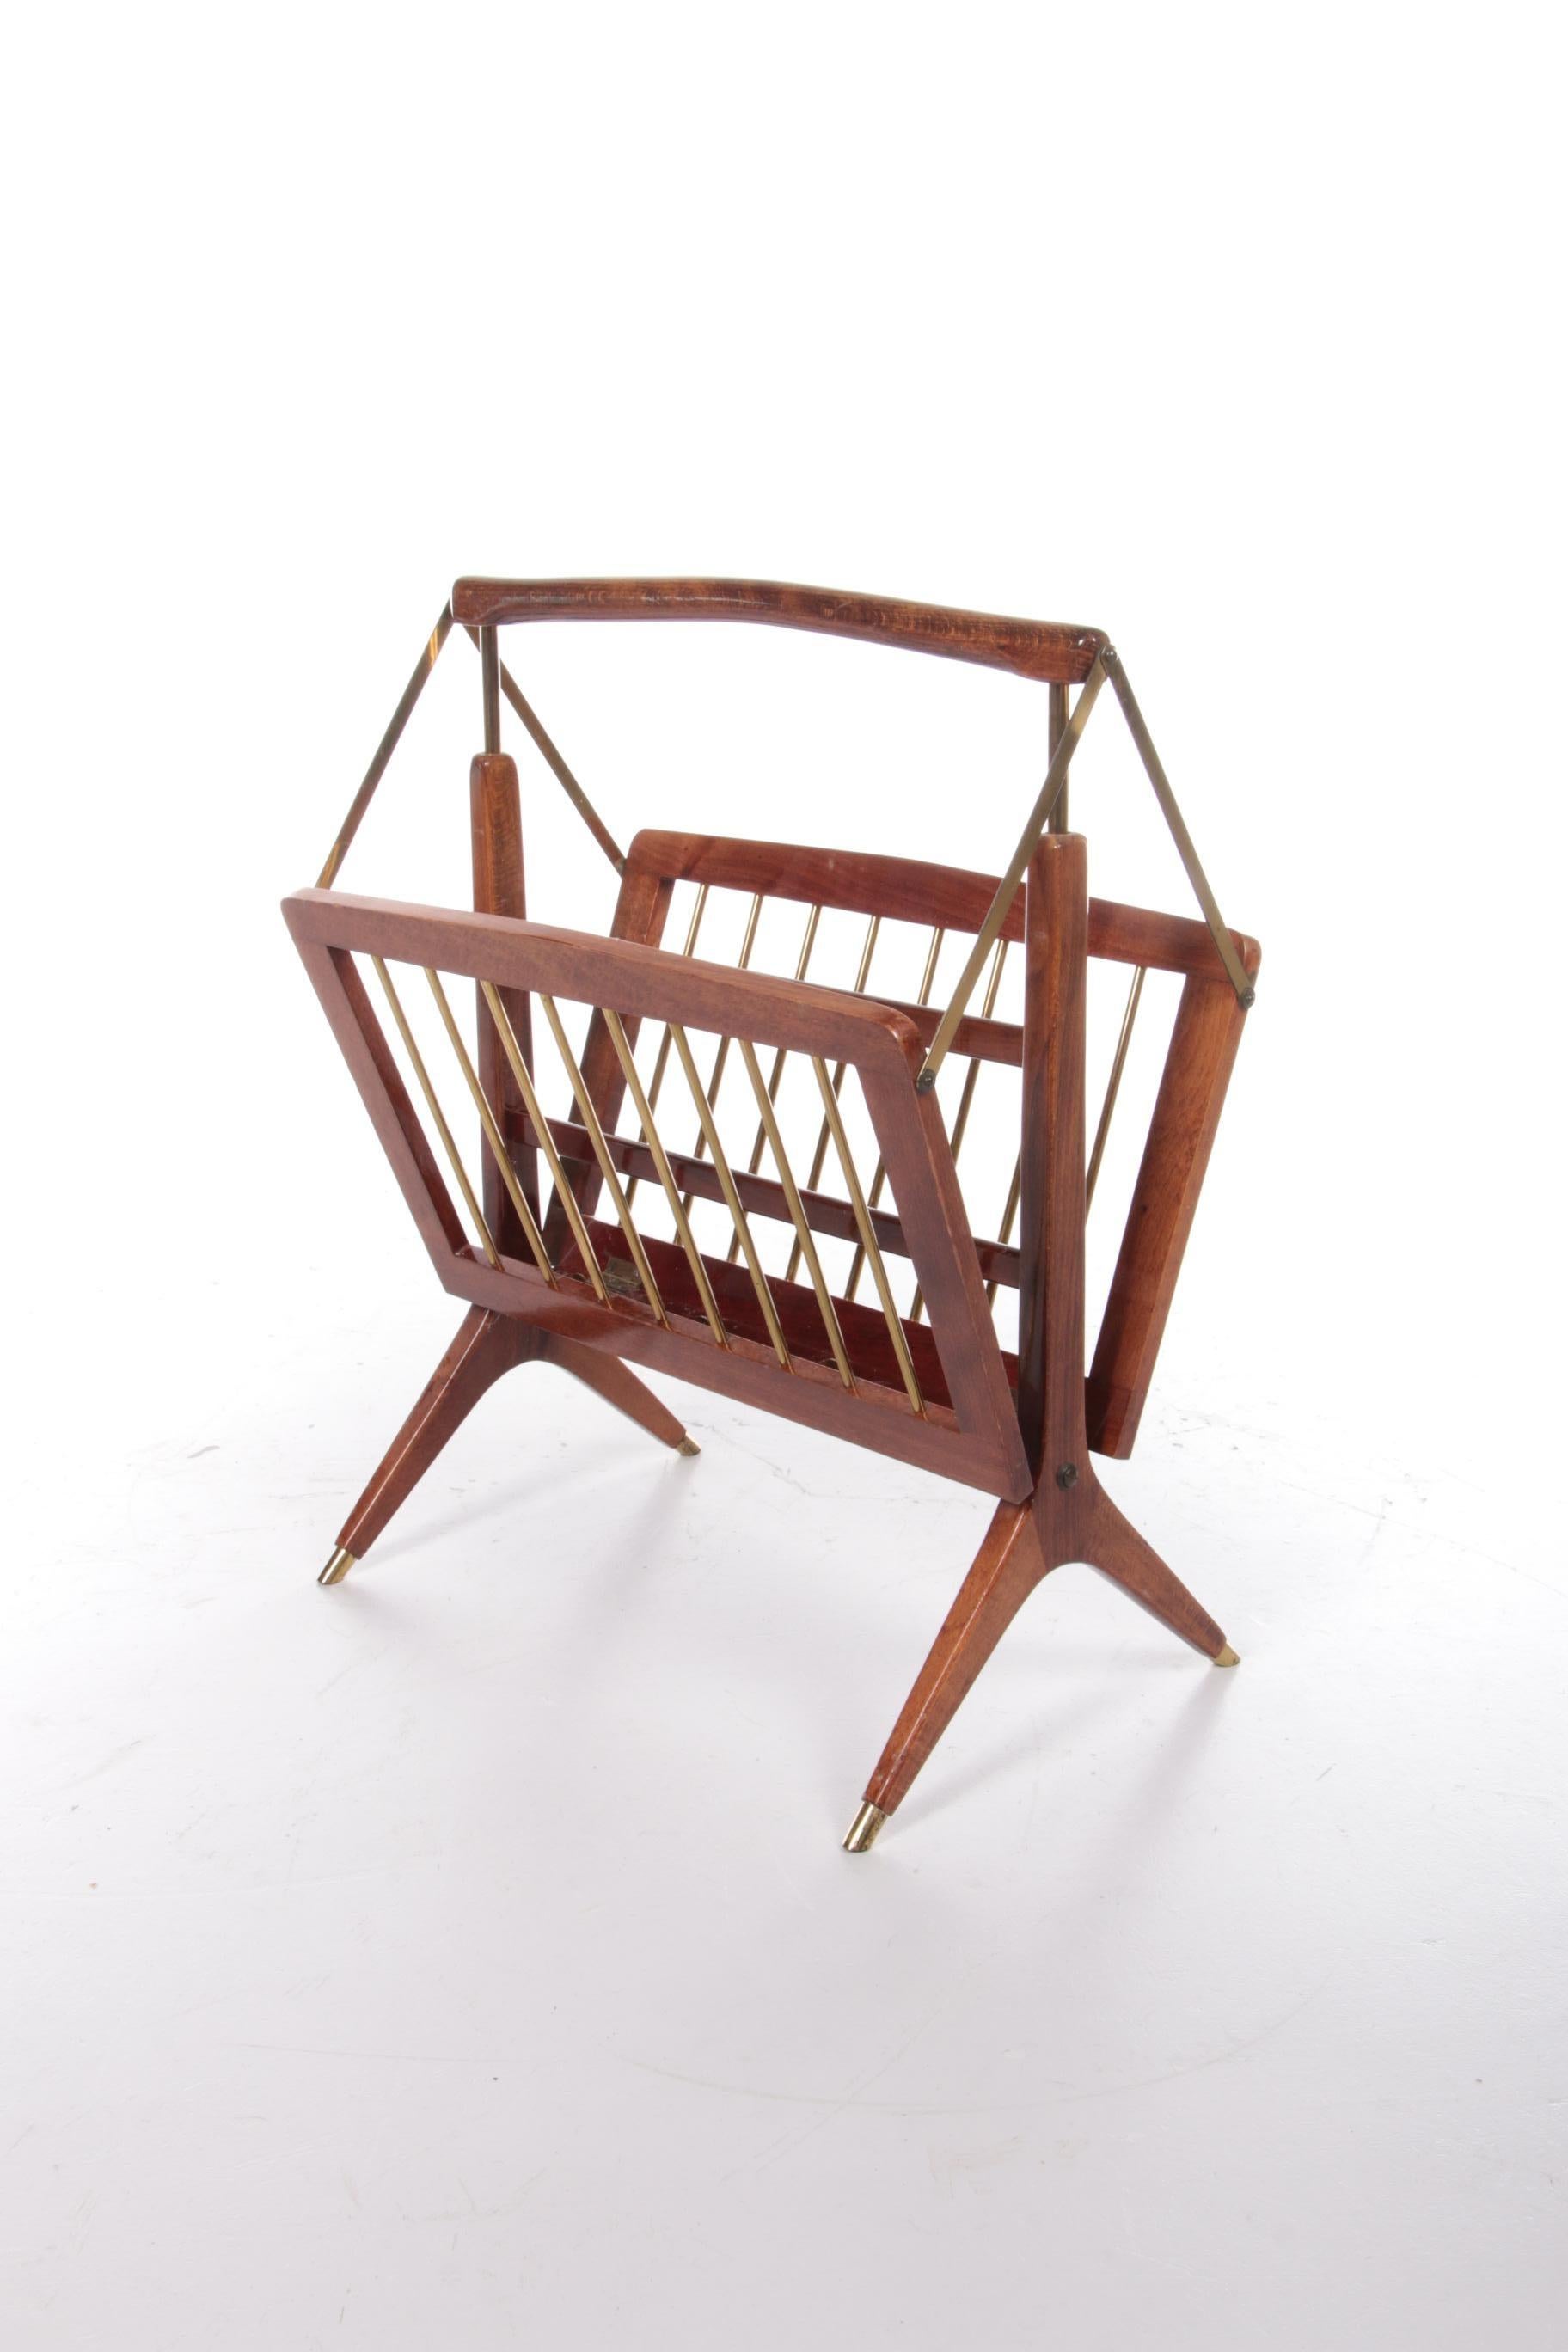 Beautiful design magazine rack designed by Cesare Lacca from Italy in the 60s.

The rack is made of brass with walnut wood. The storage rack is collapsible.

This is a really nice rare find, still in top condition.